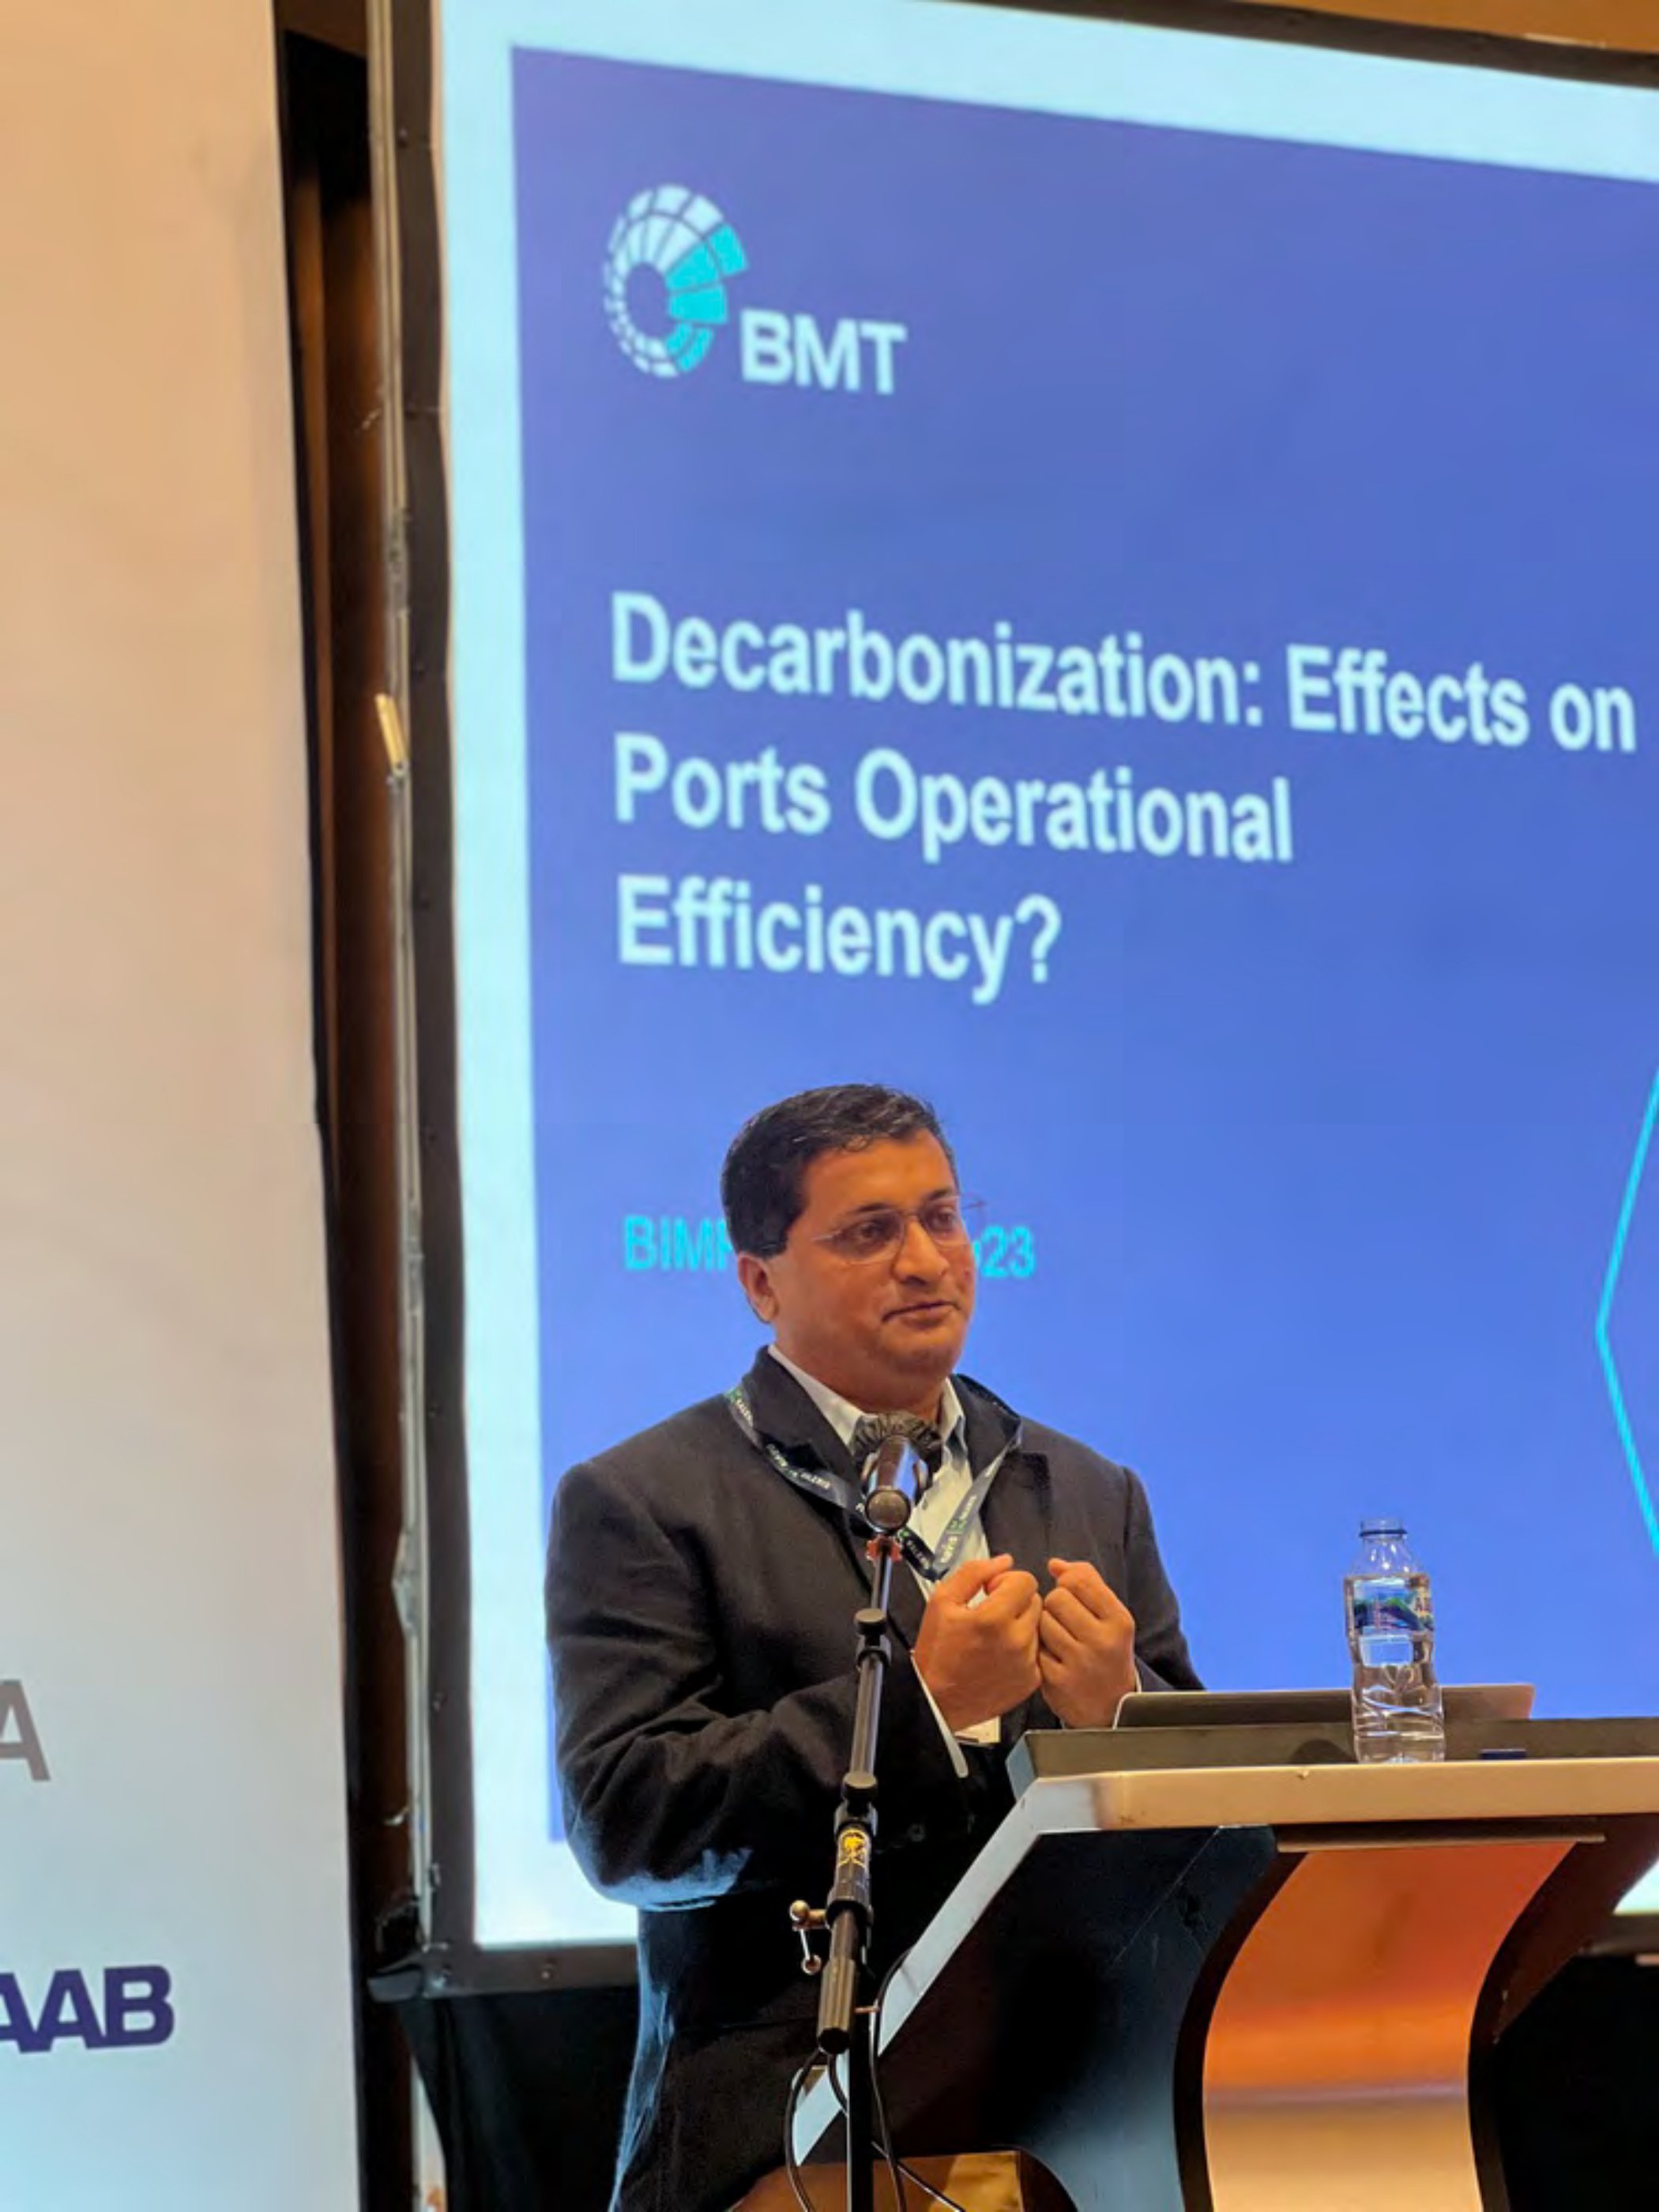 BIMP-EAGA Maritime 2023 - Shiva presents on decarbonization and its effects on ports operational efficiency